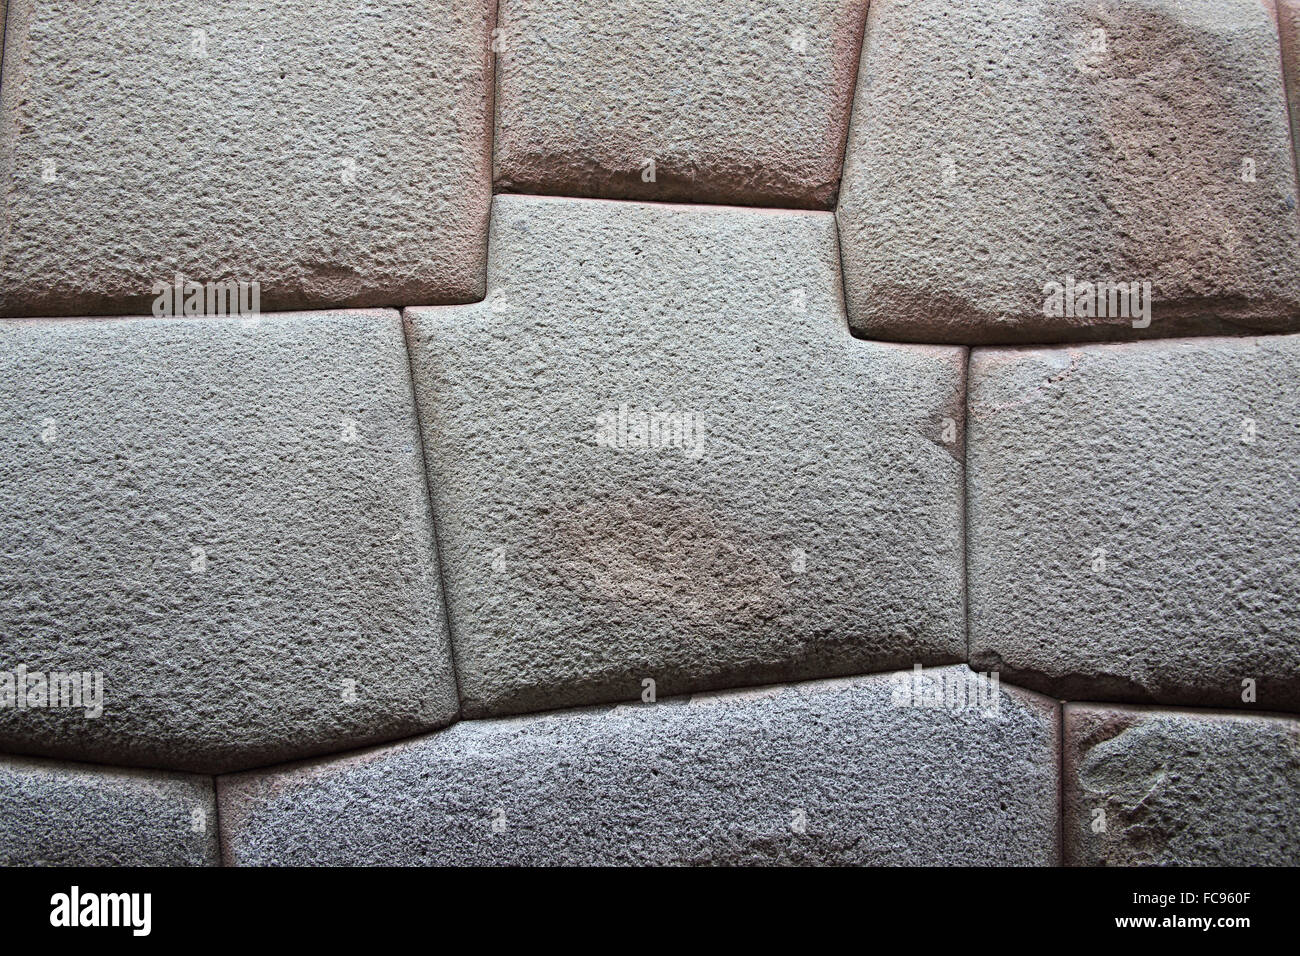 Inca Stone wall made from huge granite blocks fitted skillfully together using no cement, Cuzco, Peru Stock Photo